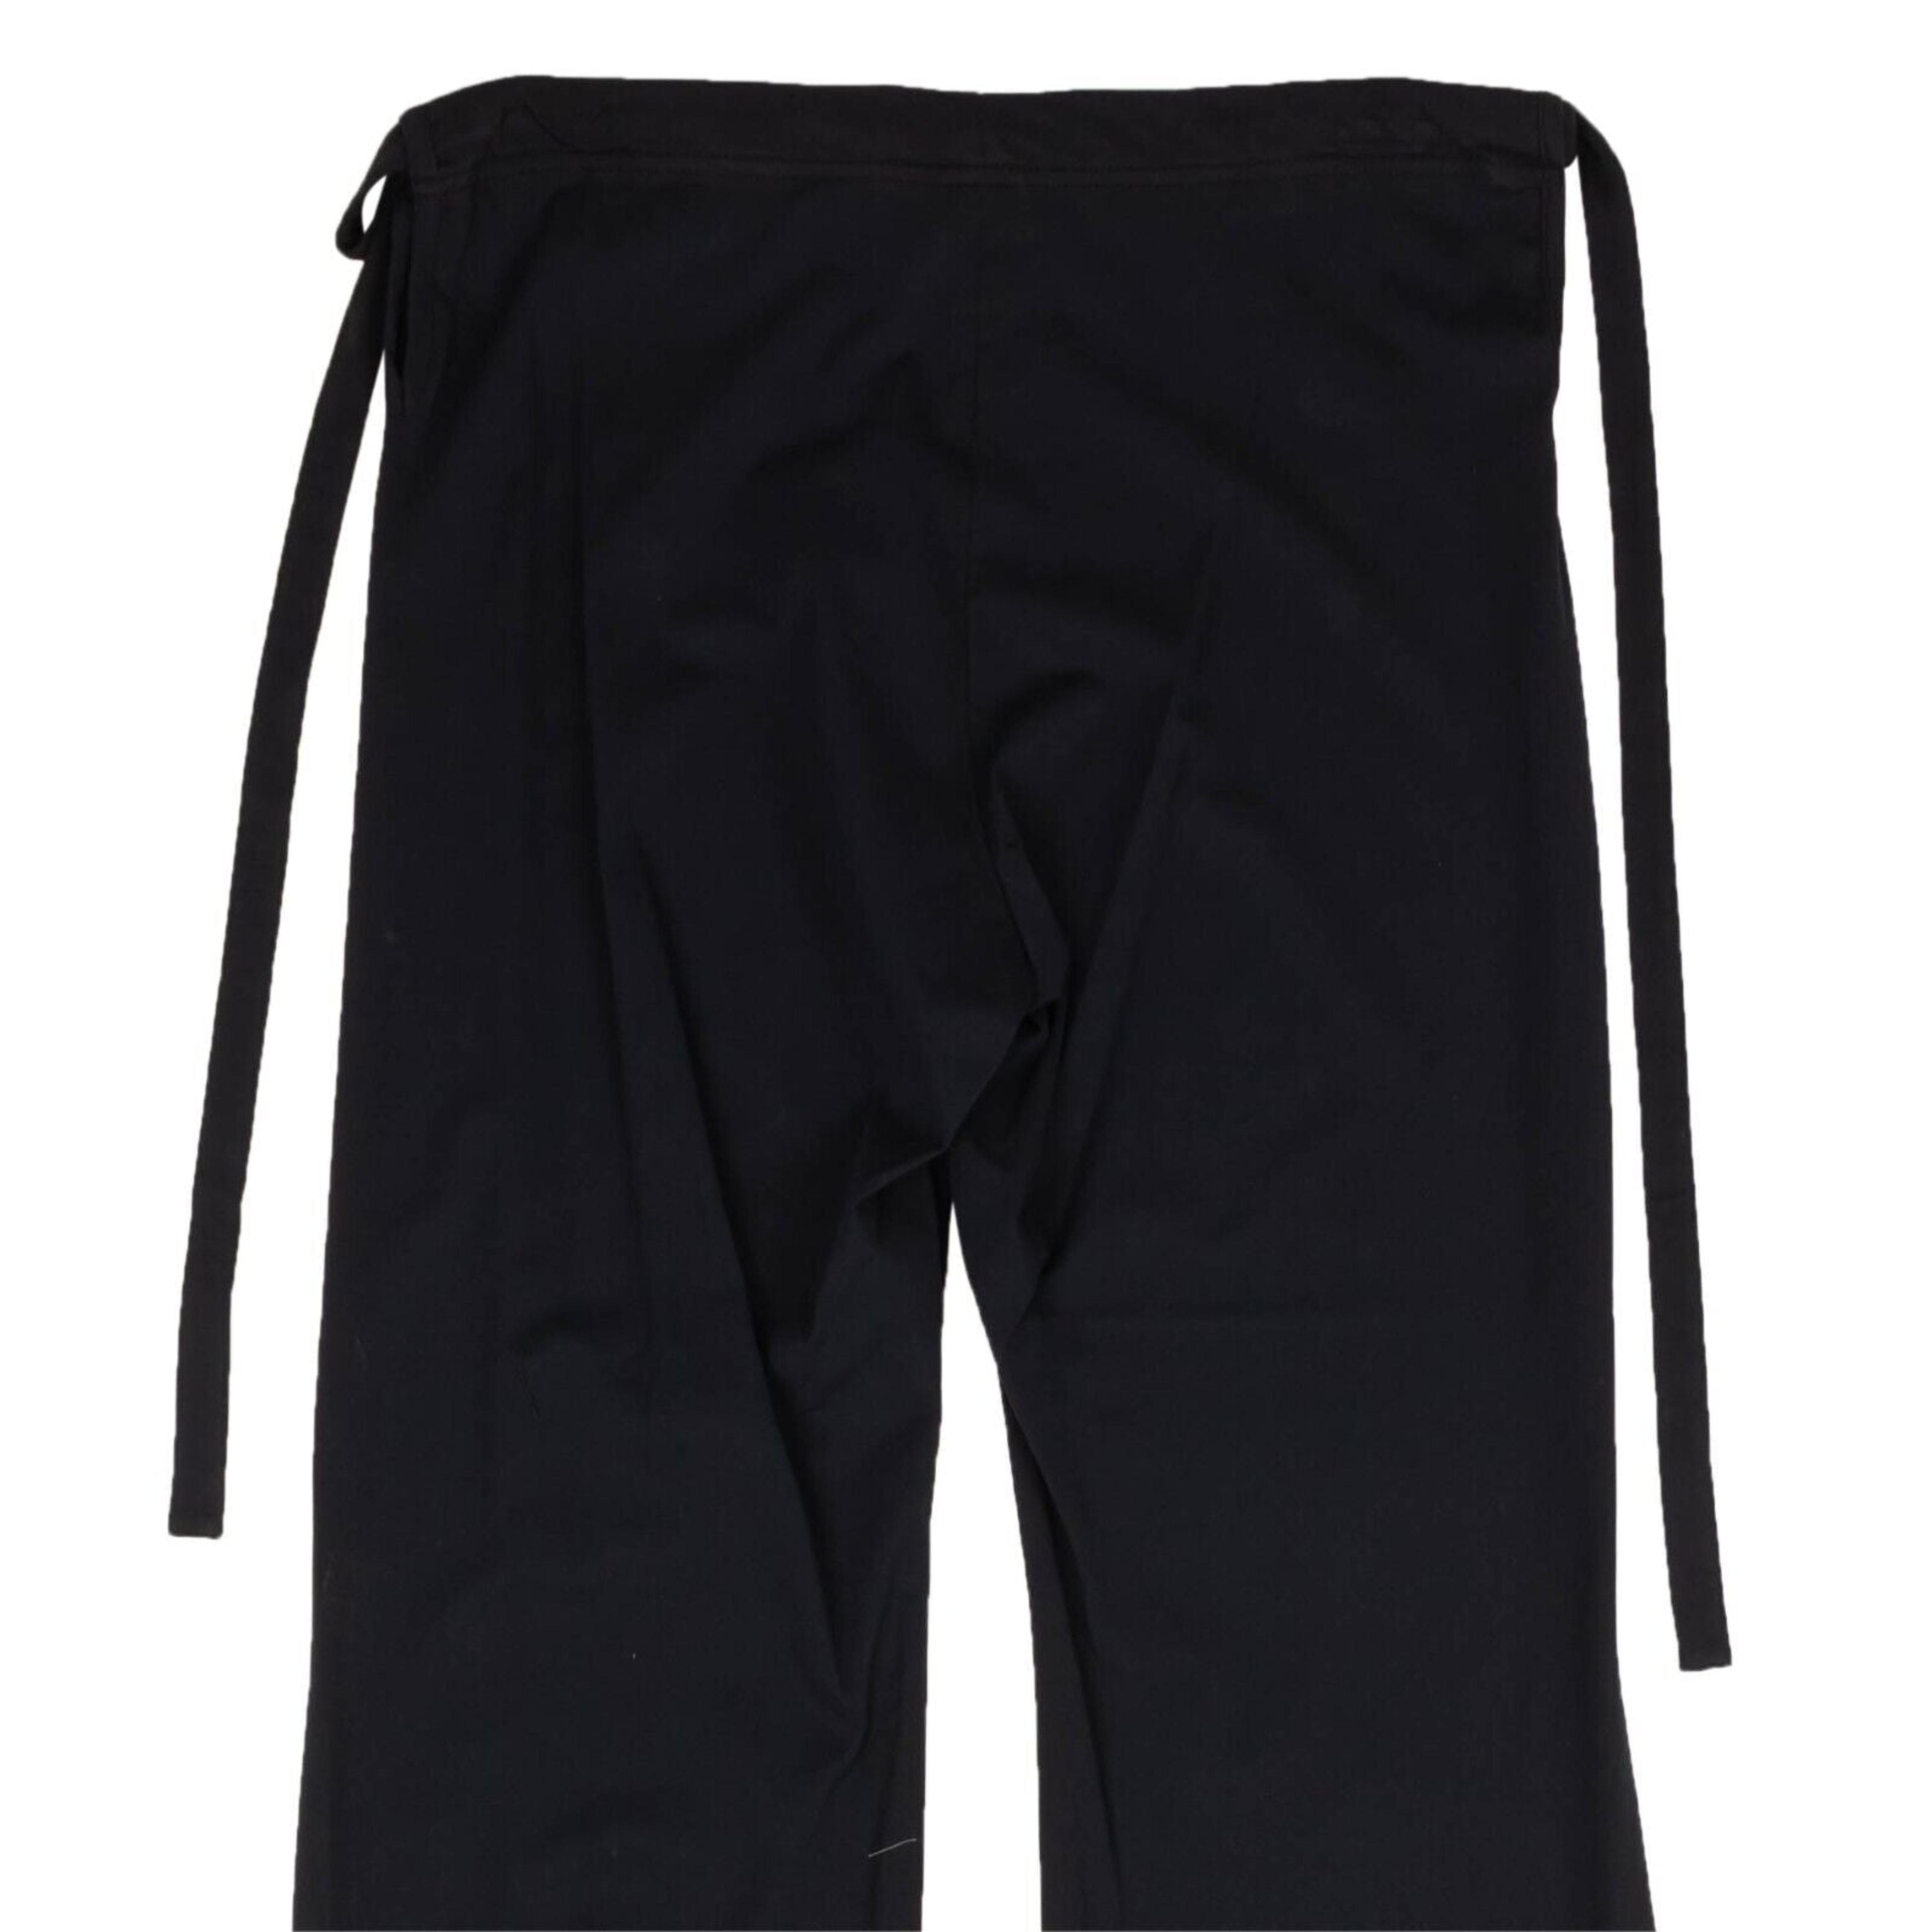 Alternate View 3 of A.P.C Pants - Navy Blue